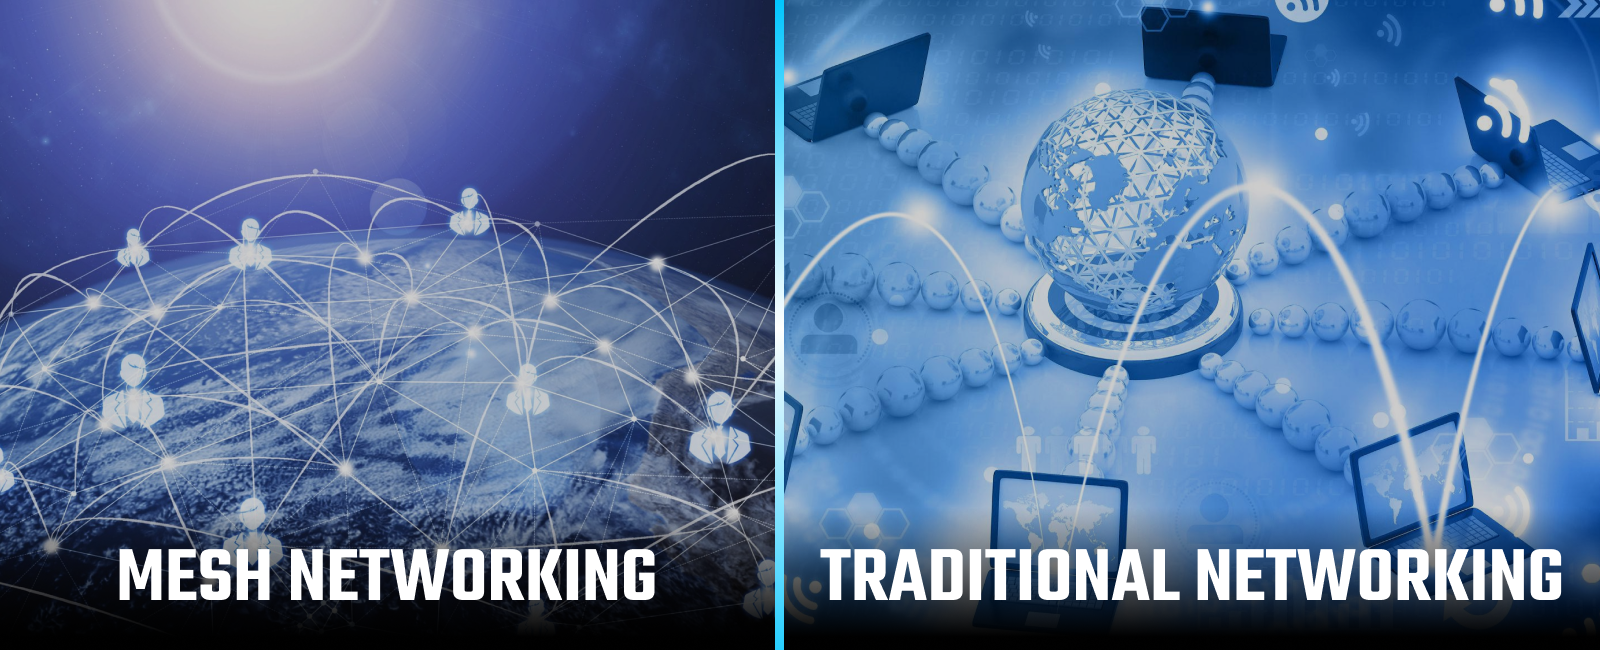 Mesh Networking vs. Traditional Networking